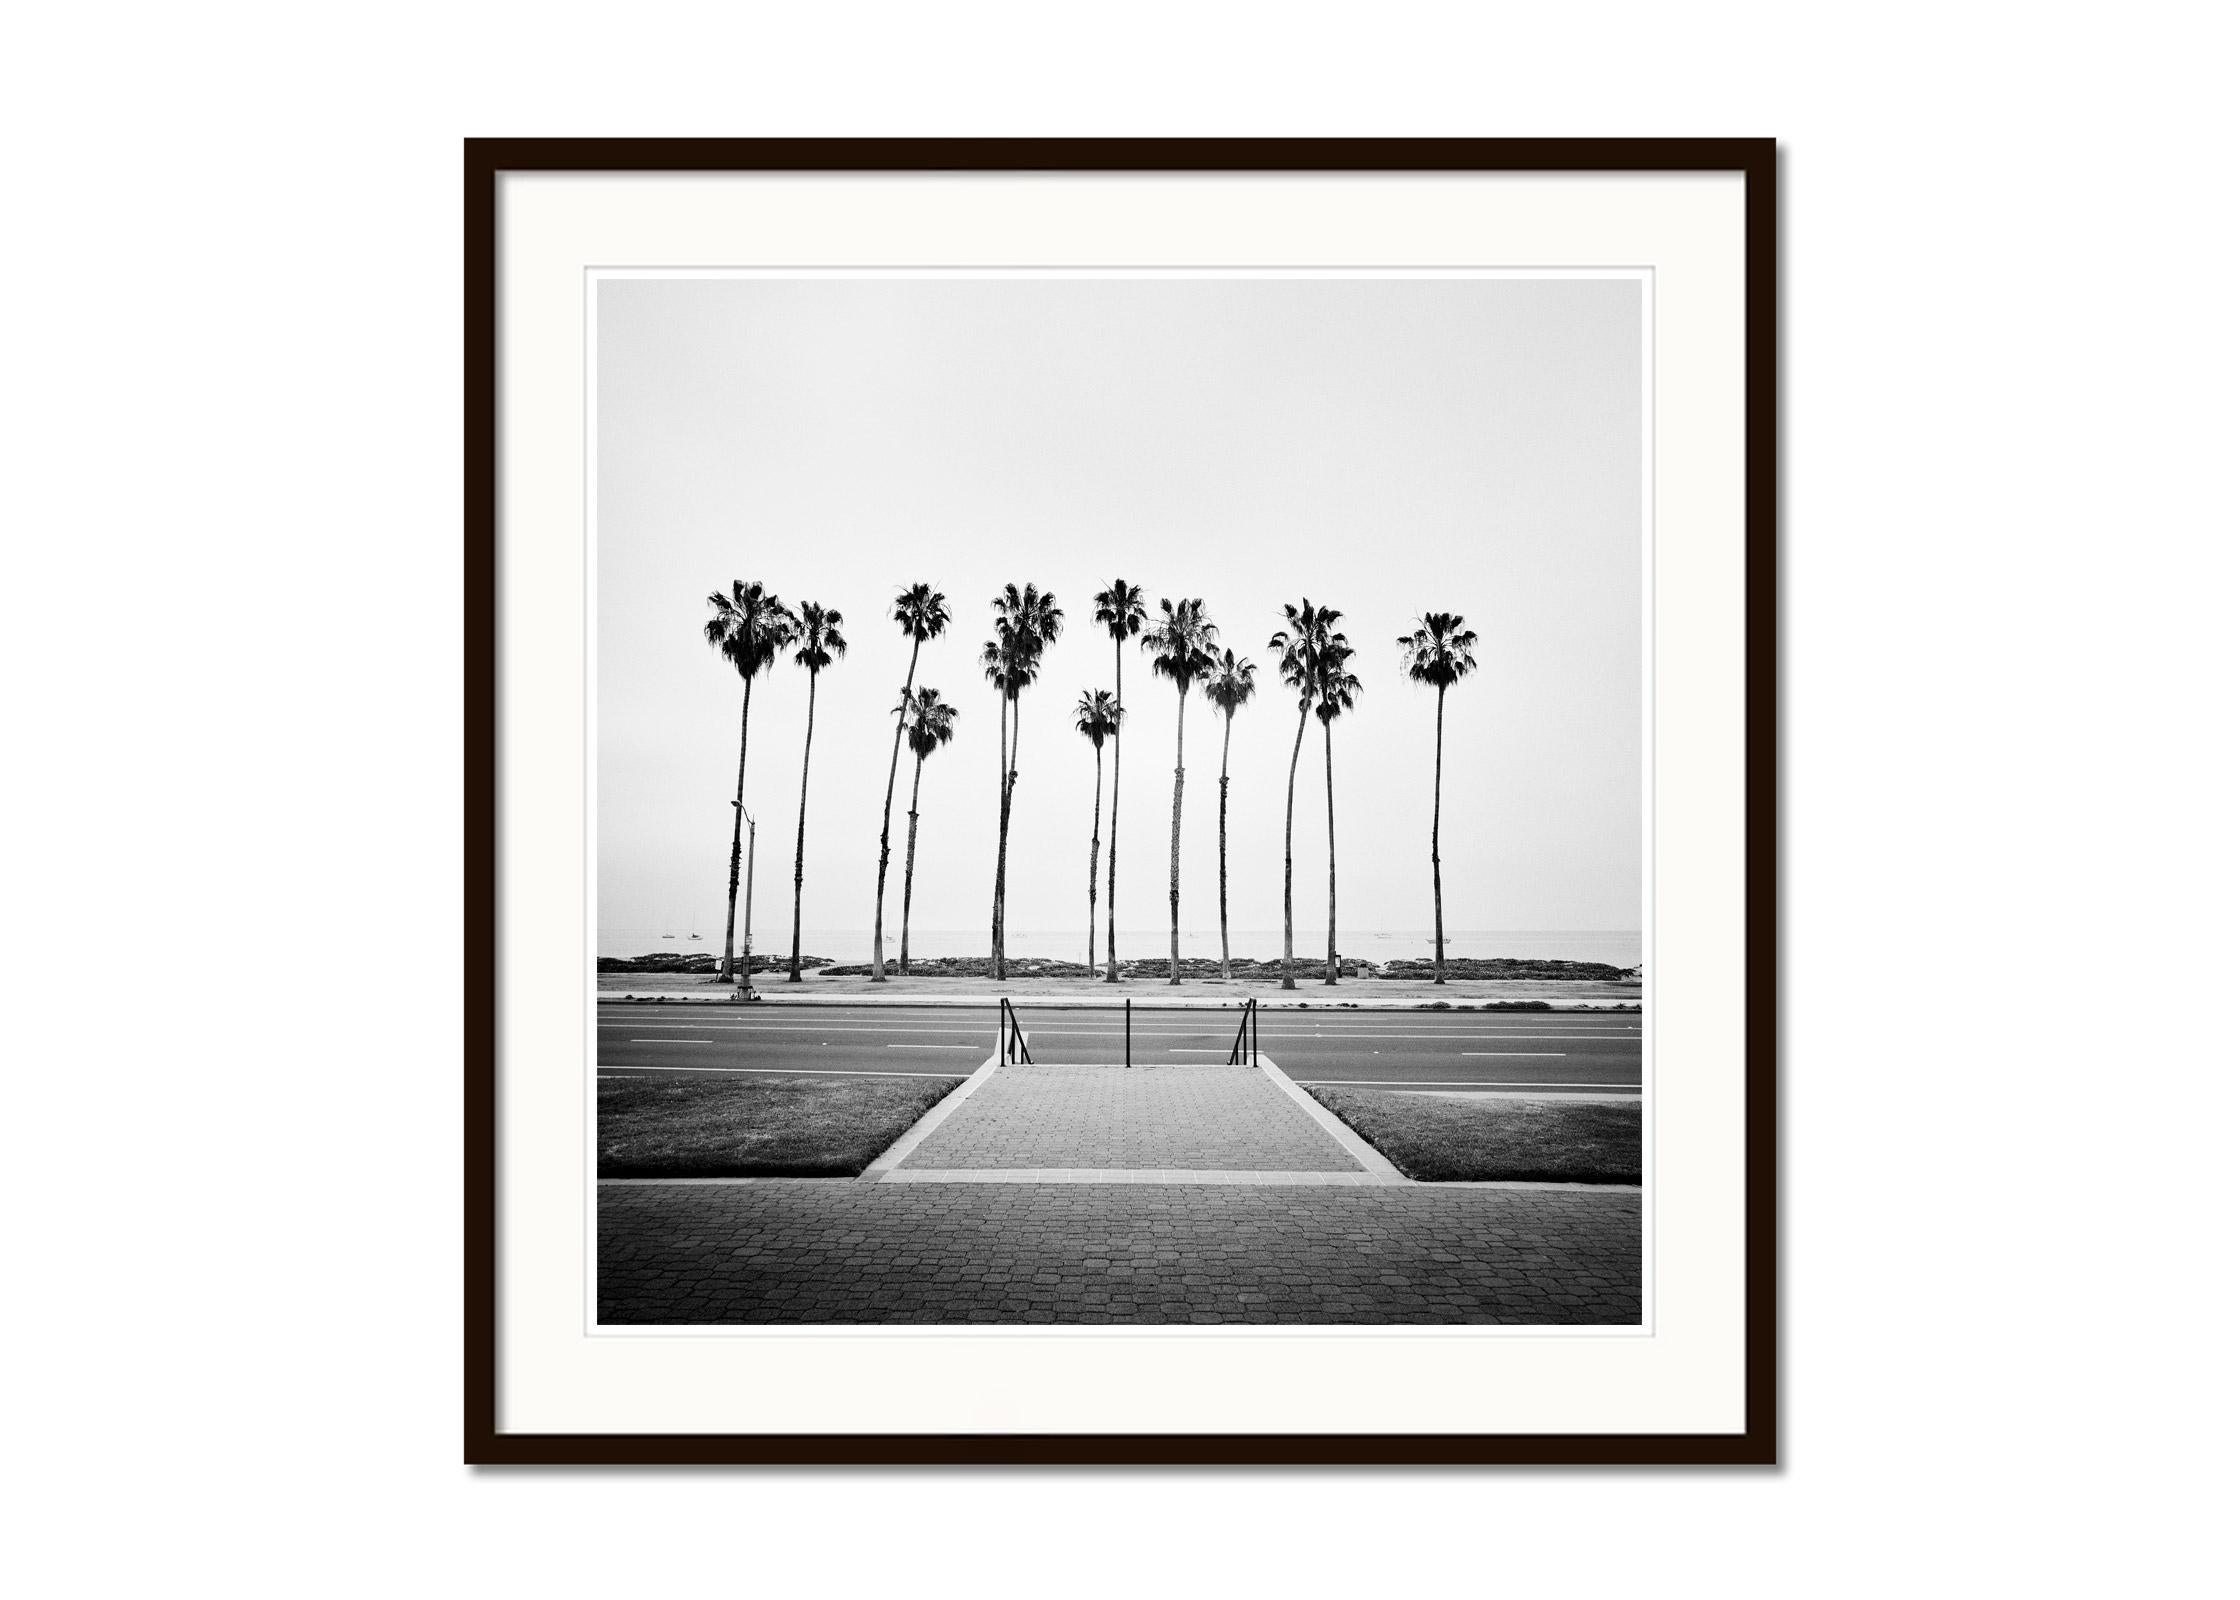 Black and white fine art landscape photography. Palm trees on the coastal road in Santa Barbara, California USA. Archival pigment ink print as part of a limited edition of 9. All Gerald Berghammer prints are made to order in limited editions on